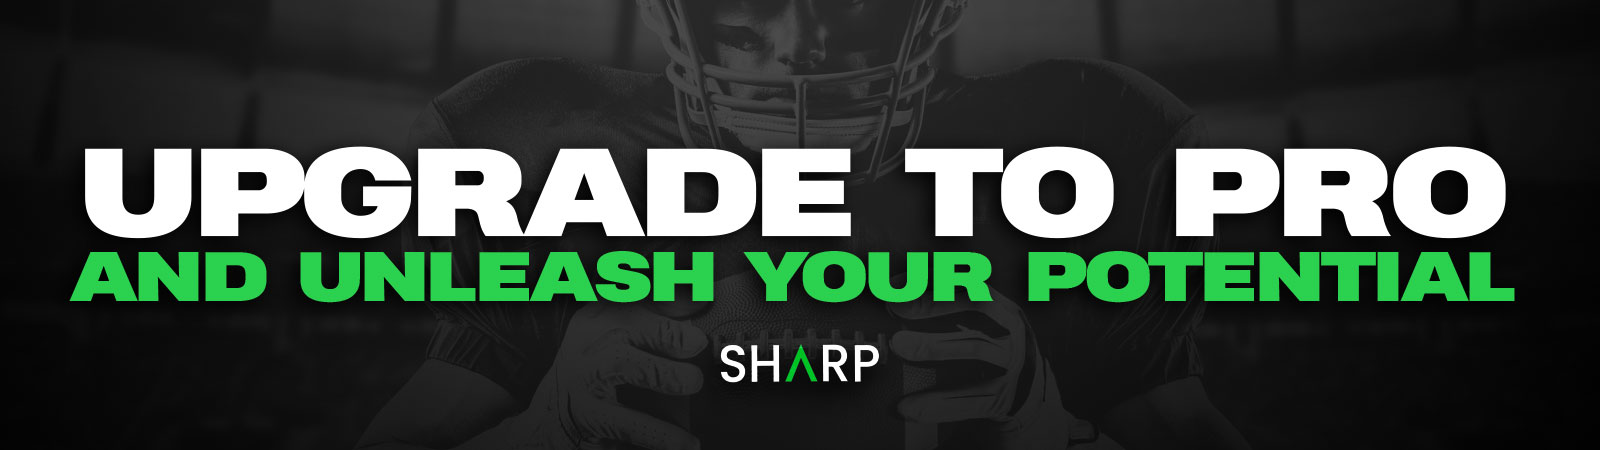 Upgrade to Sharp Pro and Unleash Your Potential With Sports Betting Tools Used By The Pros.